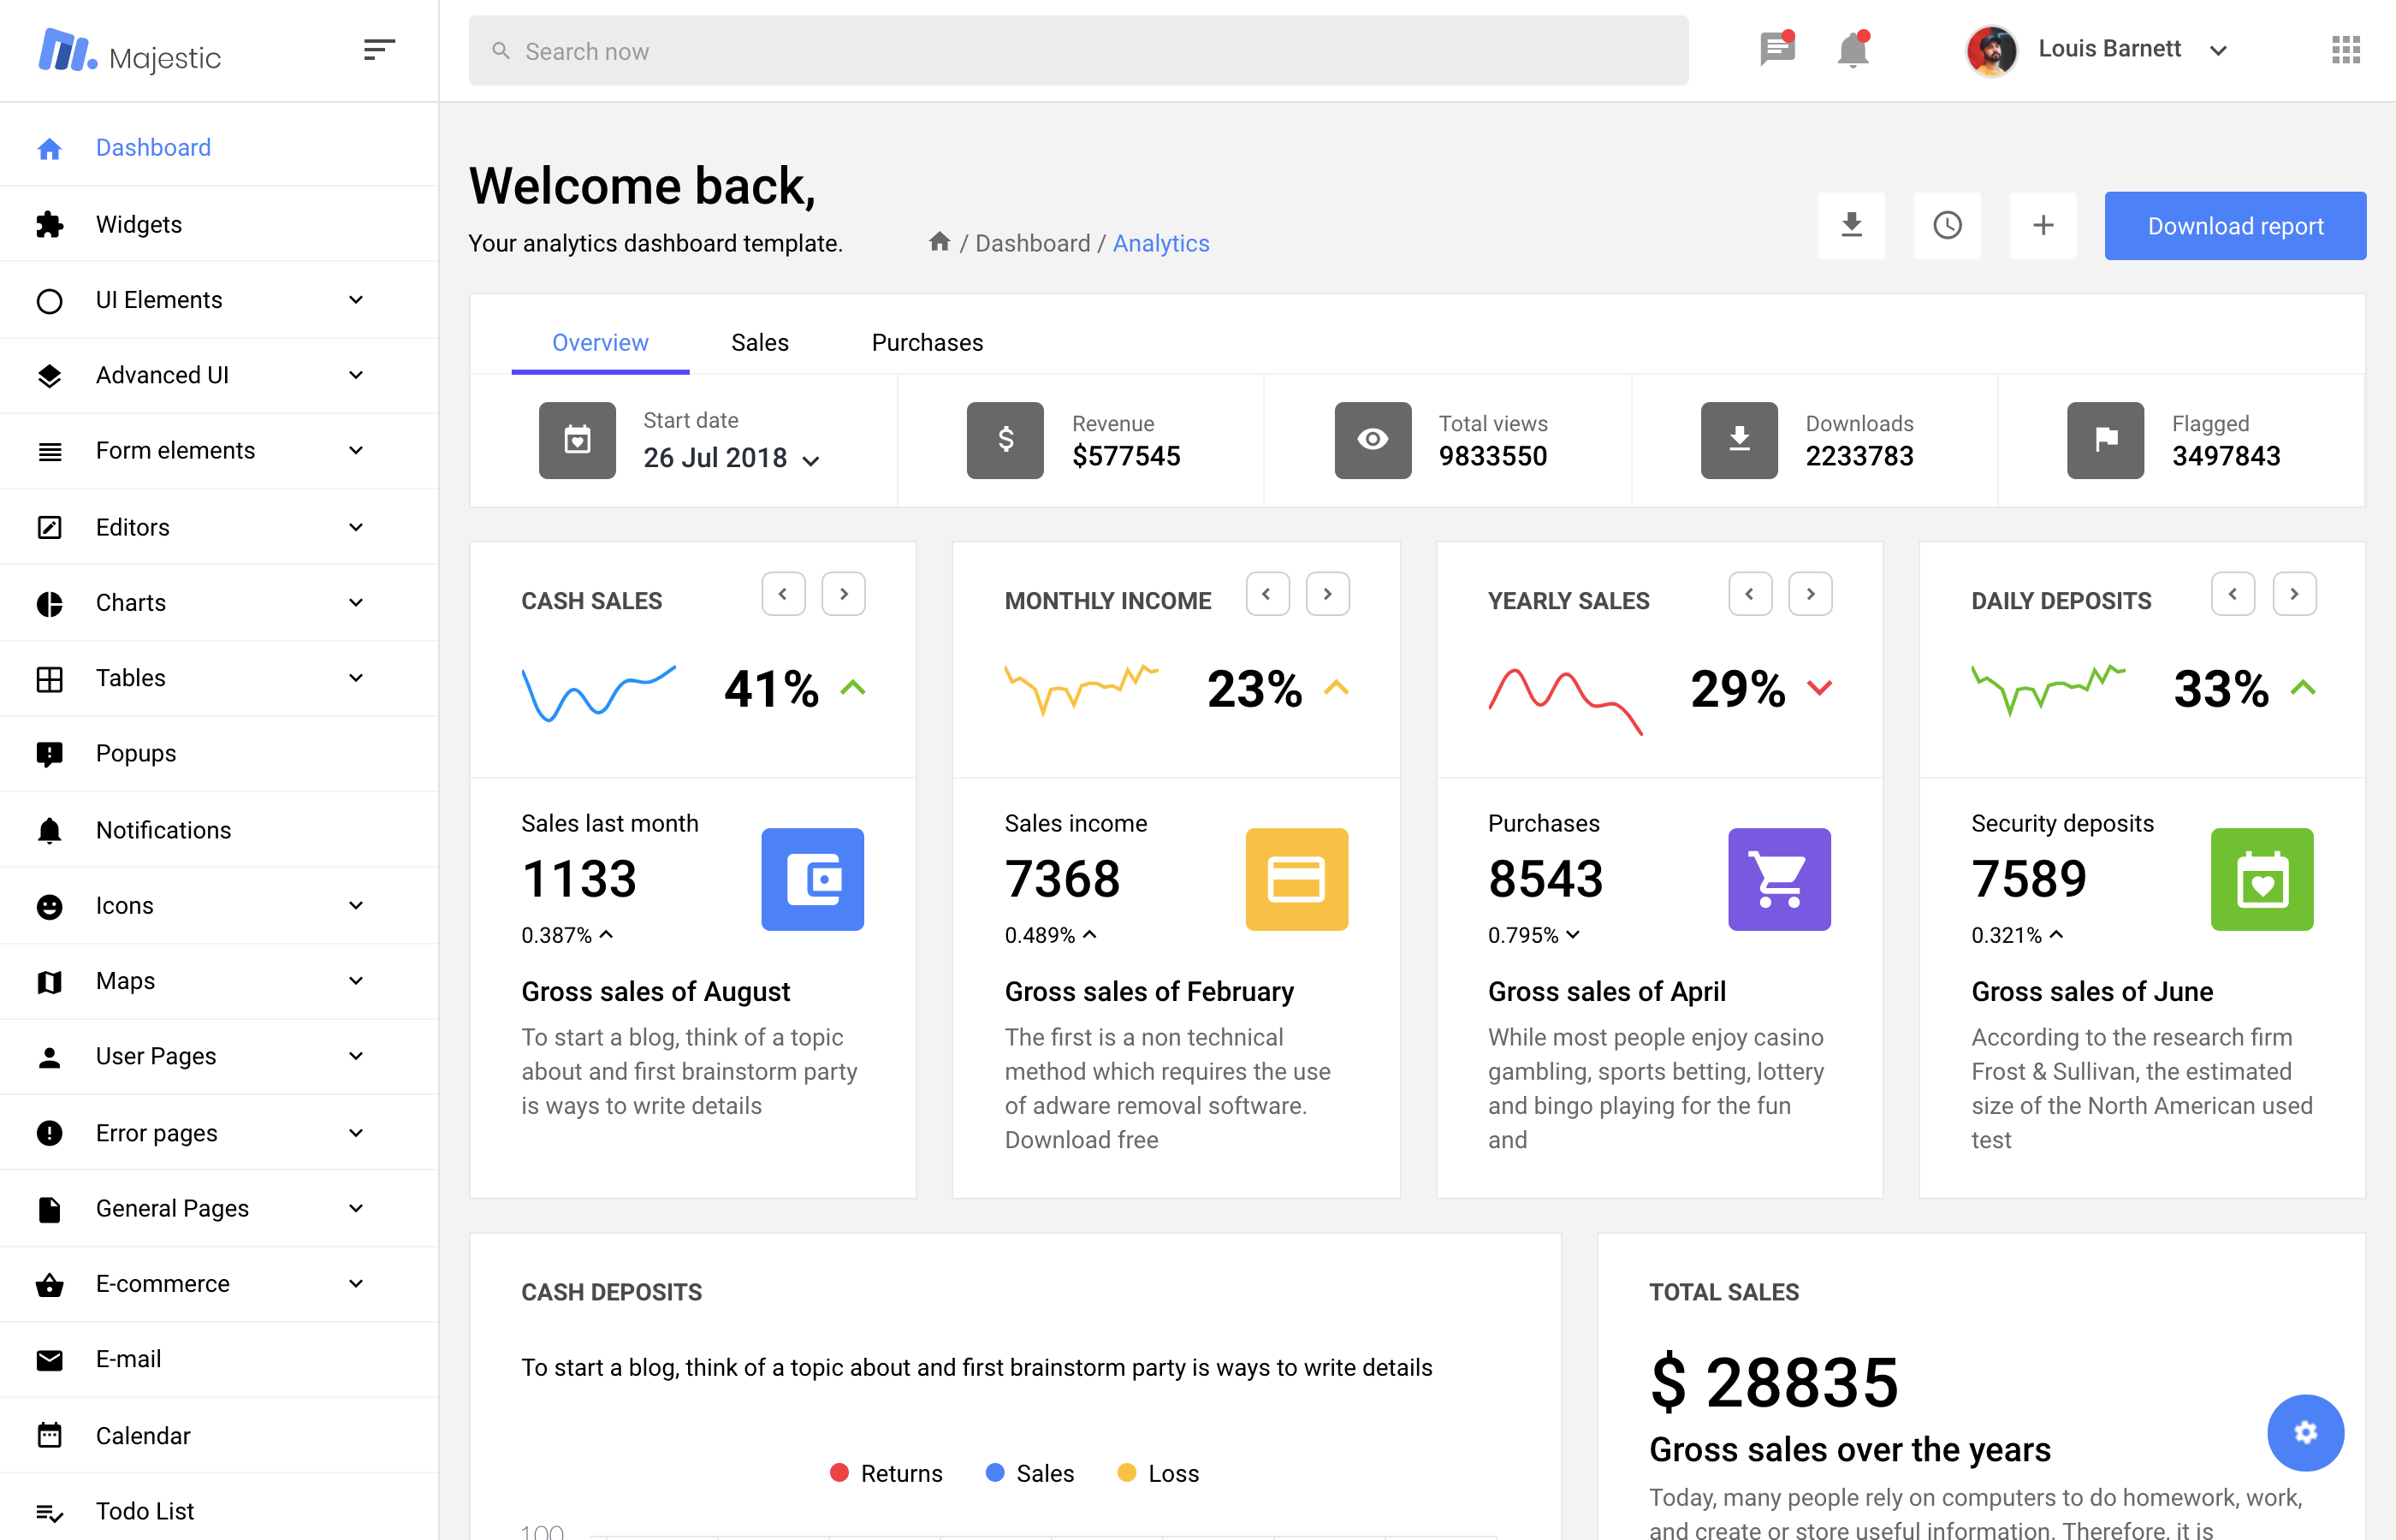 This is an image of Majestic, a jQuery admin dashboard.